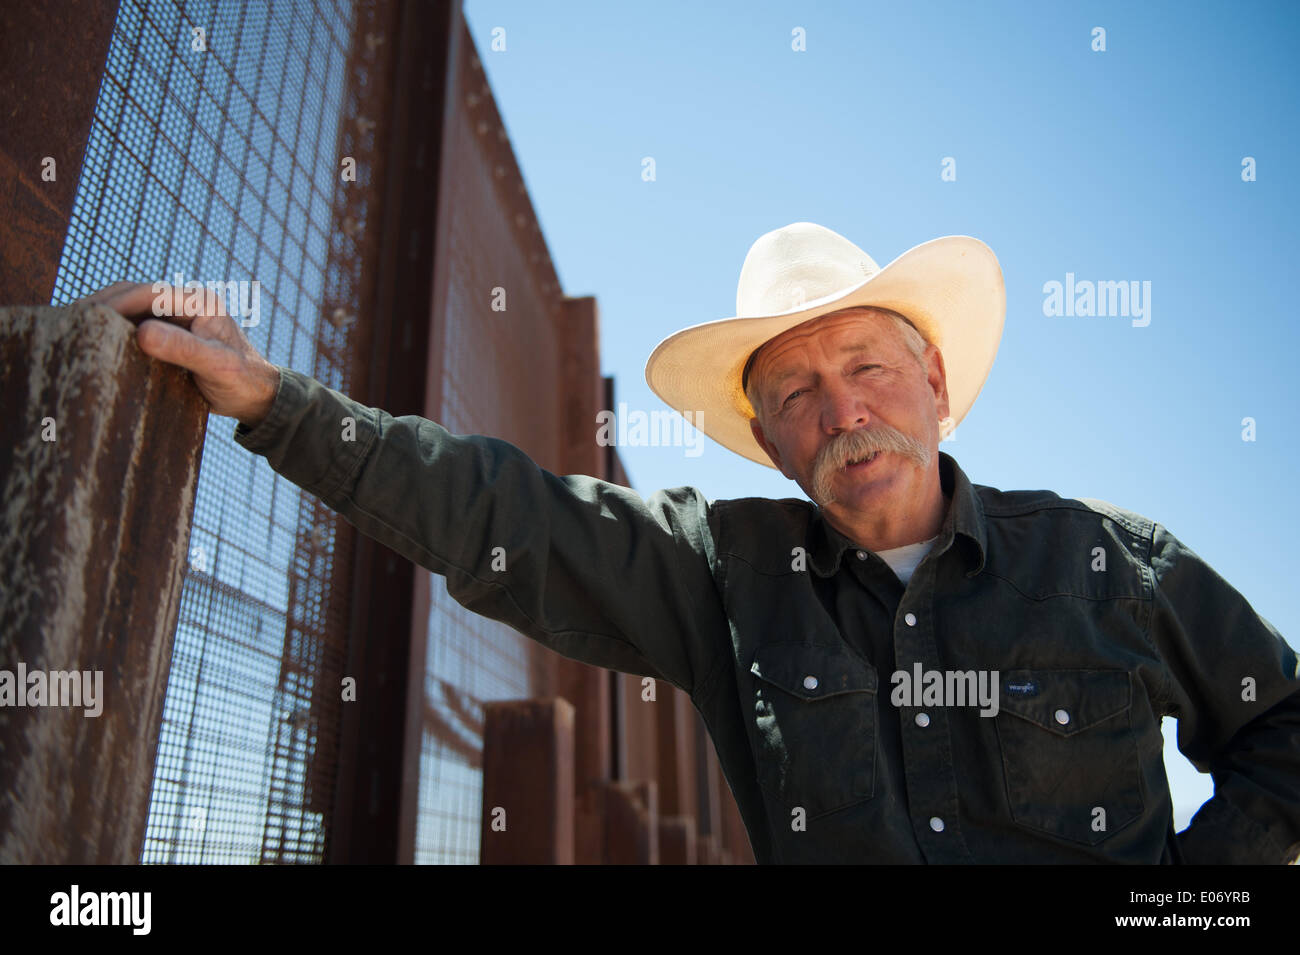 Naco, Arizona, USA. 28th Apr, 2014. Arizona cattle rancher JOHN LADD's ranch near Naco, Ariz., abuts the border fence separating the U.S. and Mexico. Over the years he's had problems caused by both smugglers and U.S. Border Patrol agents including damage to his property, livestock and grass. © Will Seberger/ZUMAPRESS.com/Alamy Live News Stock Photo